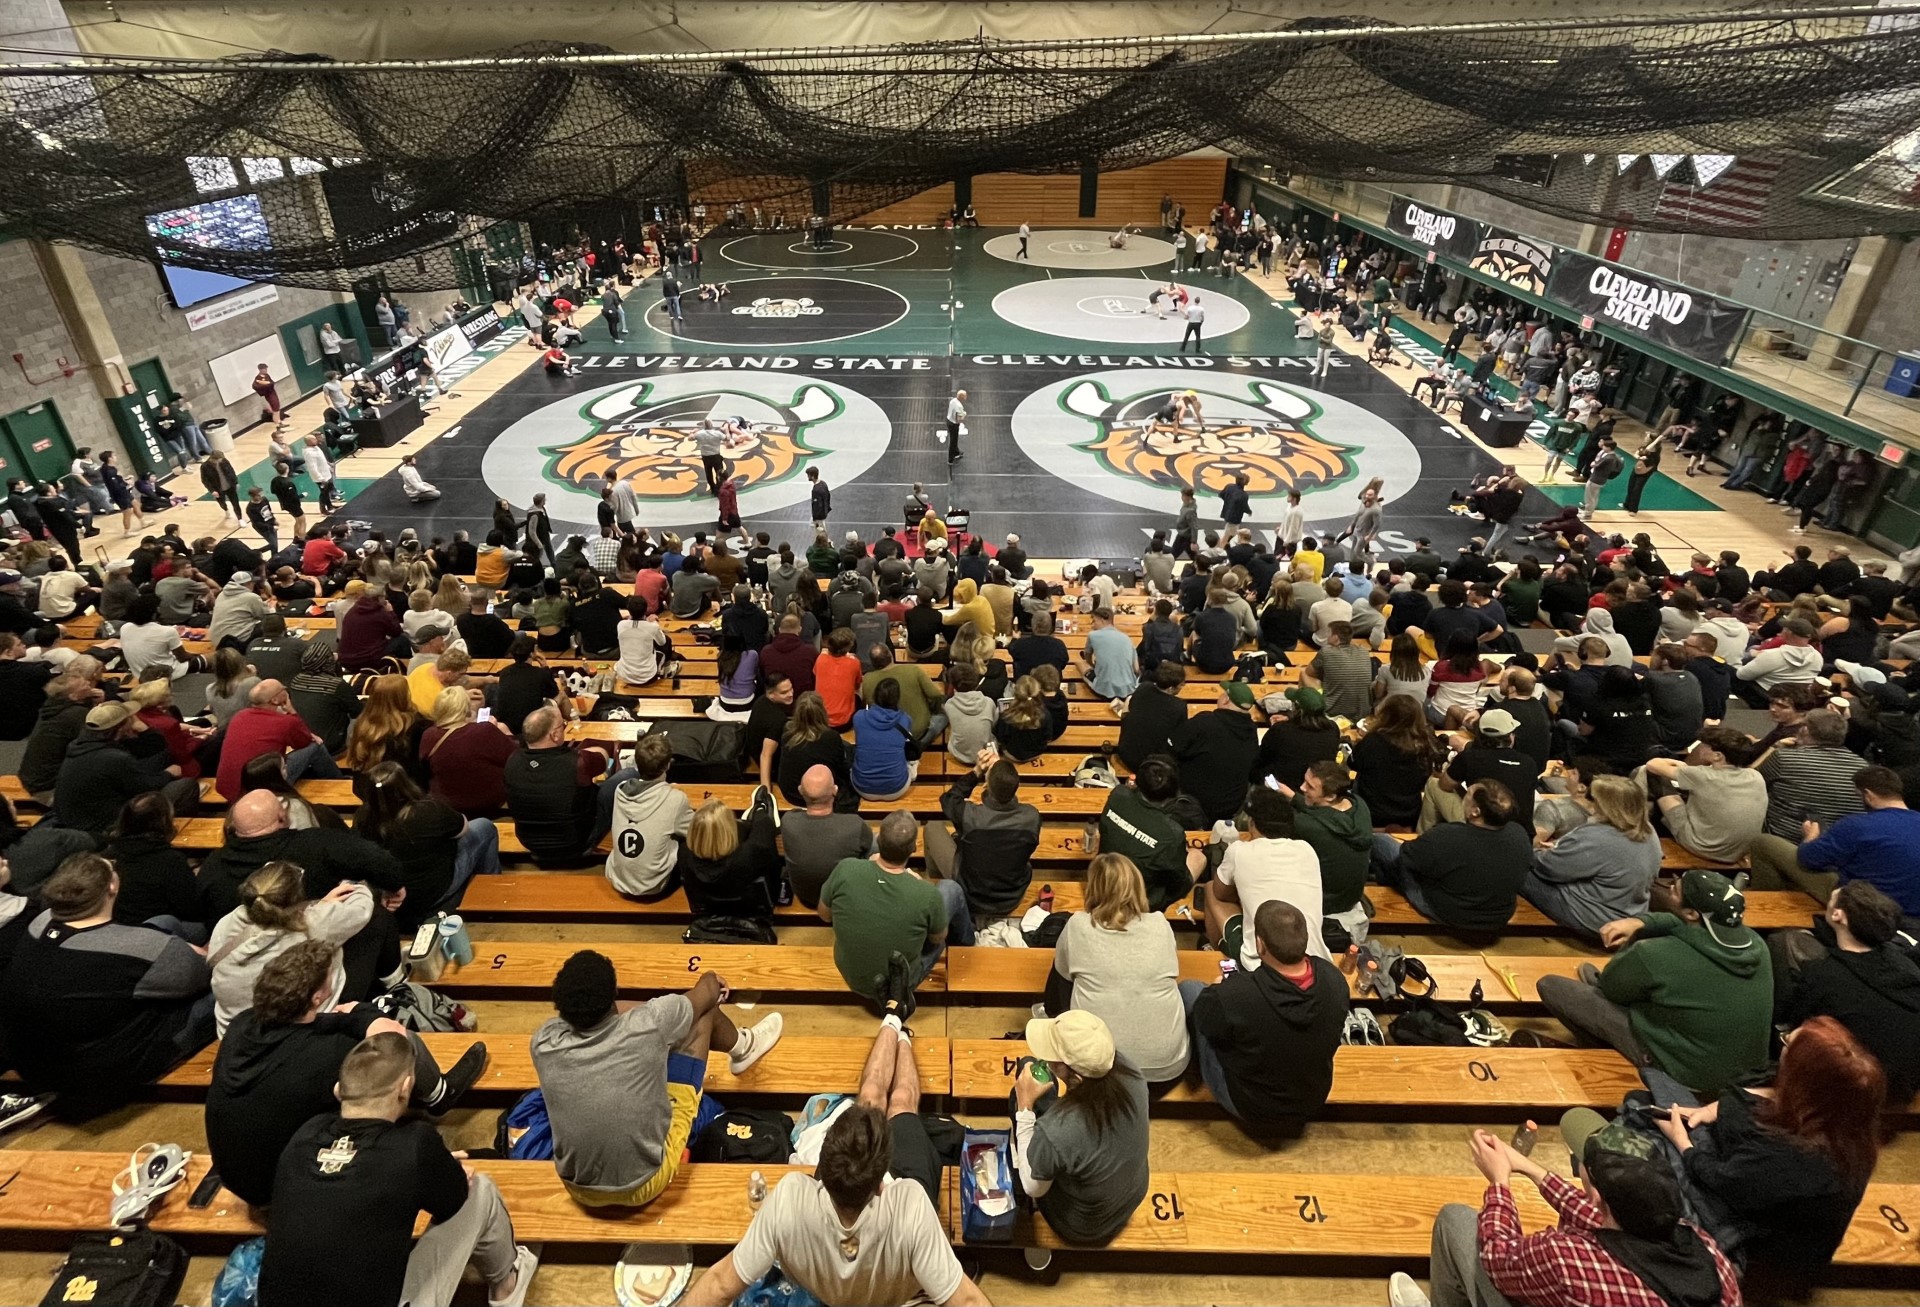 Cleveland State With Three Champions, Six Placers at Cleveland State Open